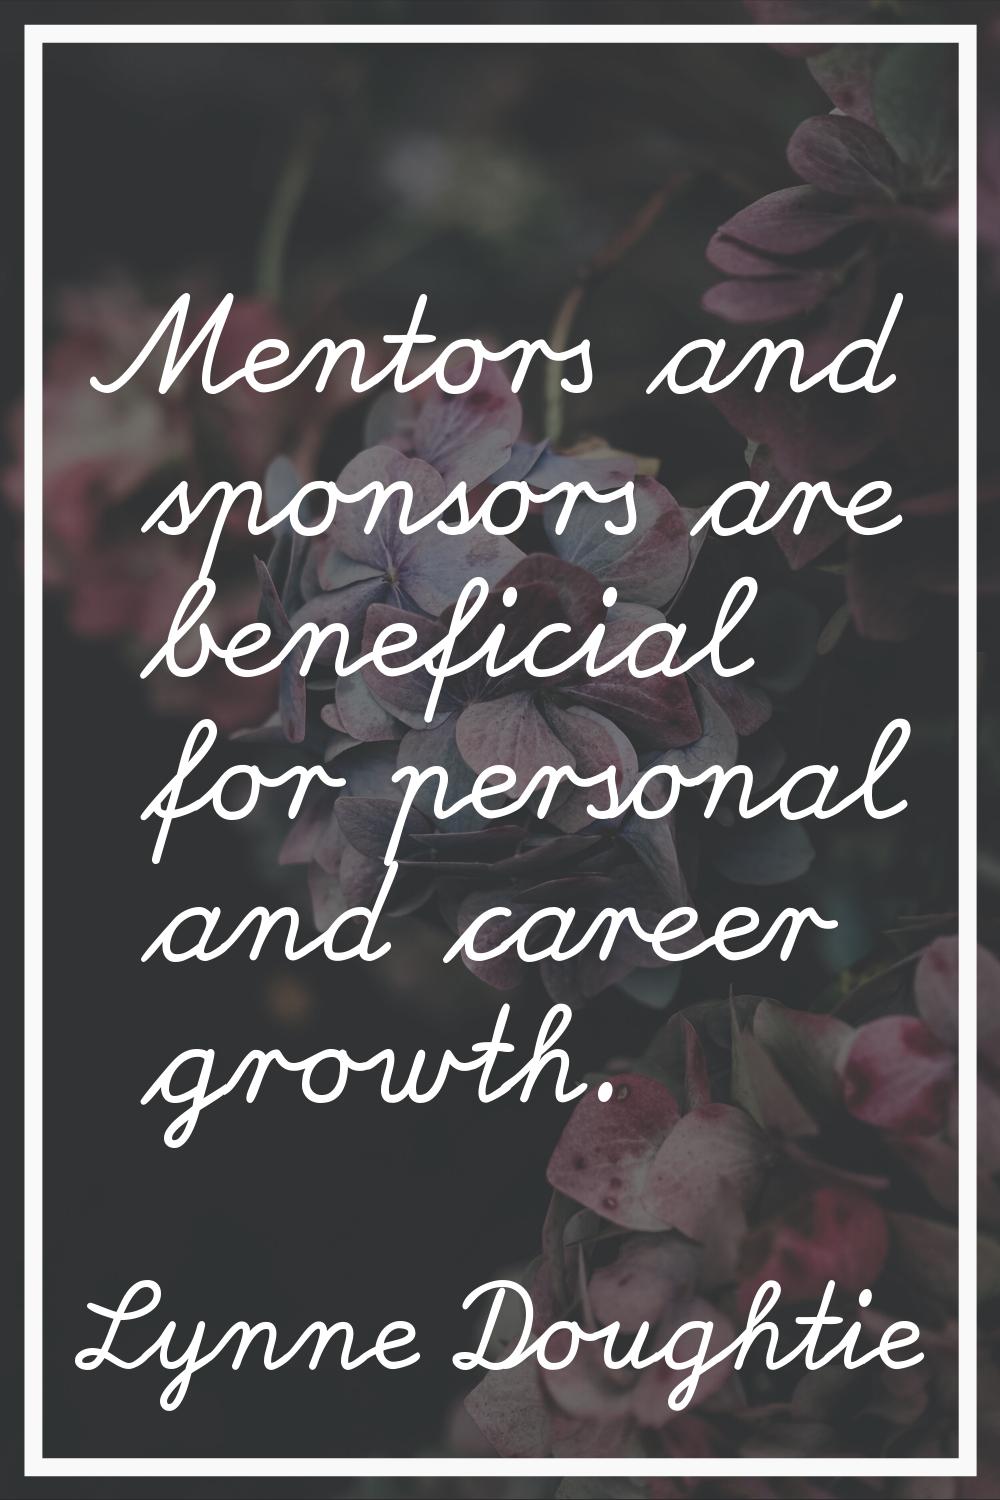 Mentors and sponsors are beneficial for personal and career growth.